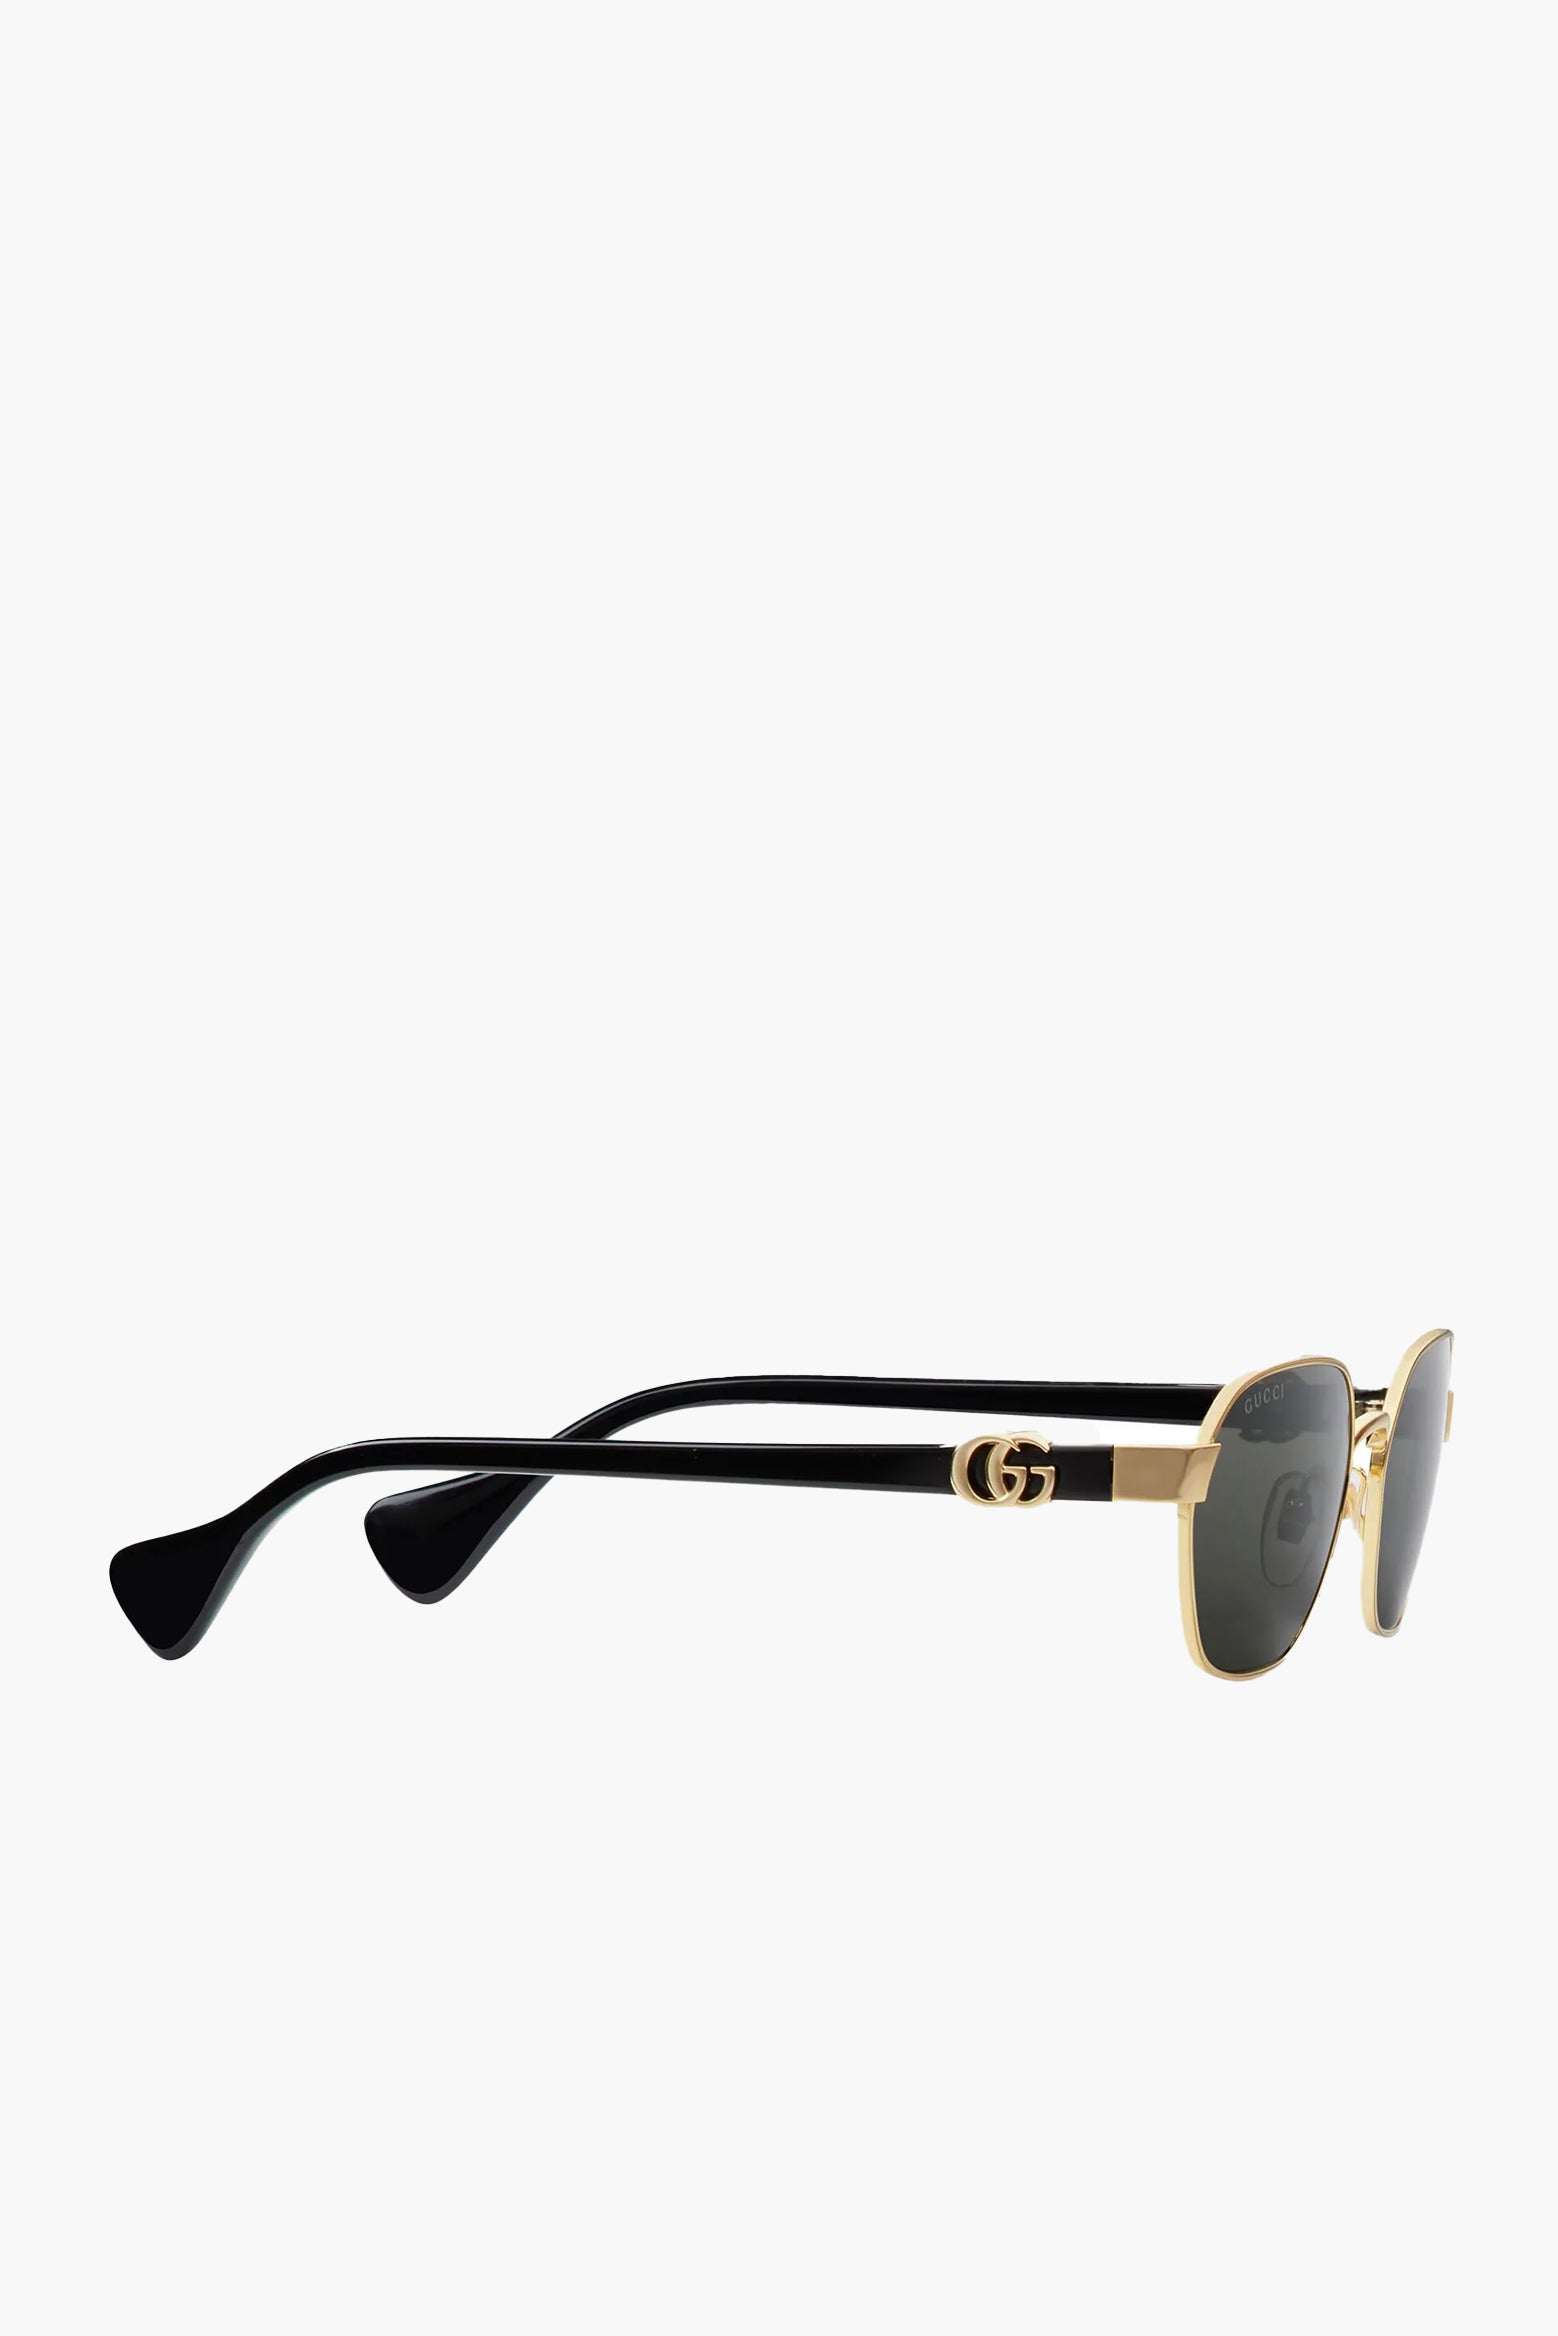 GUCCI Round-Frame Sunglasses in Gold | The New Trend 